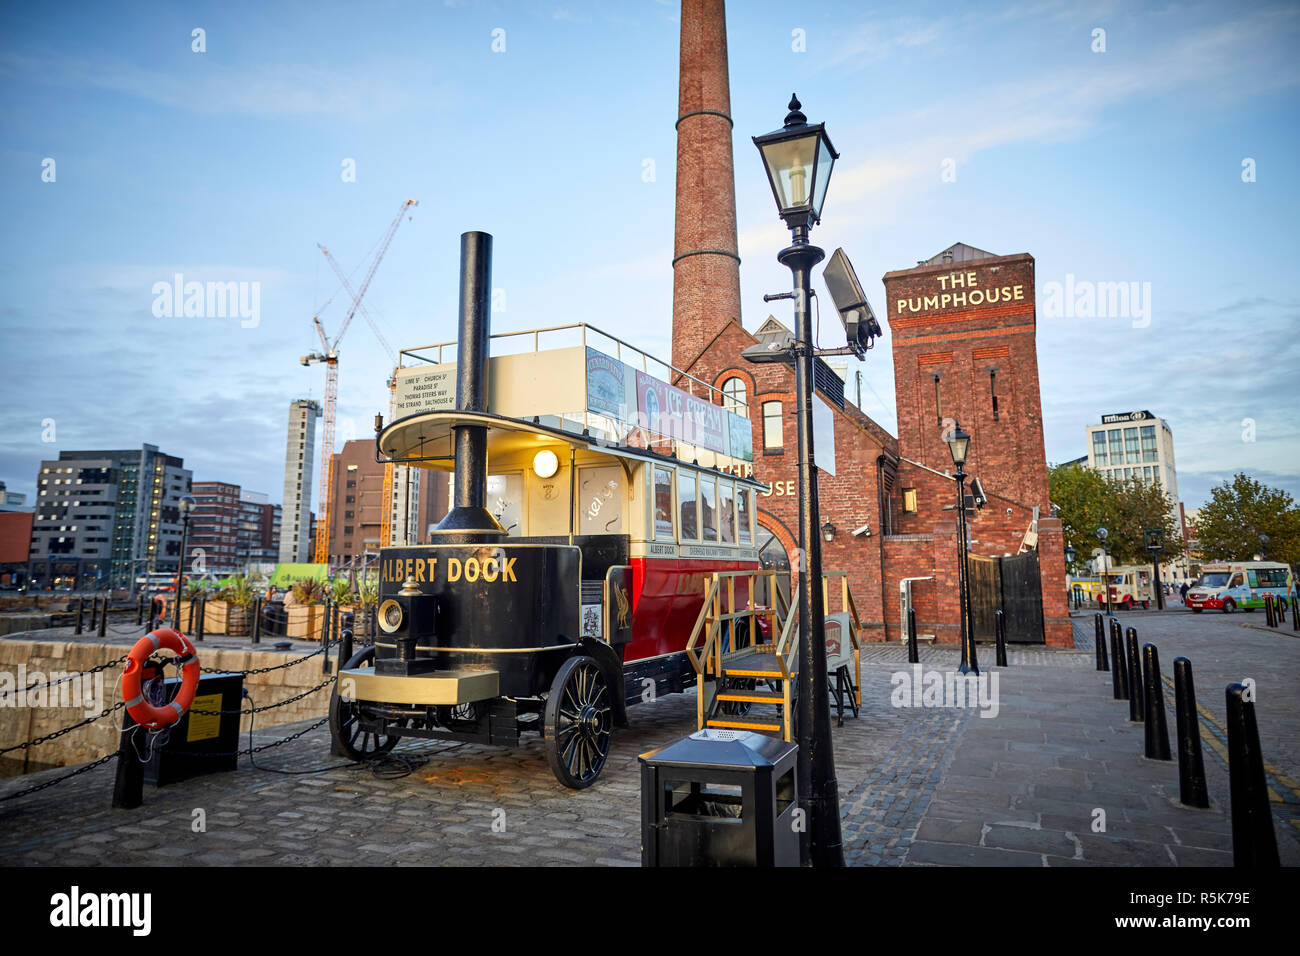 Pier head Liverpool Waterfront promenade Royal Albert Dock The Pump House pub and a ic cream stall steam bus Stock Photo